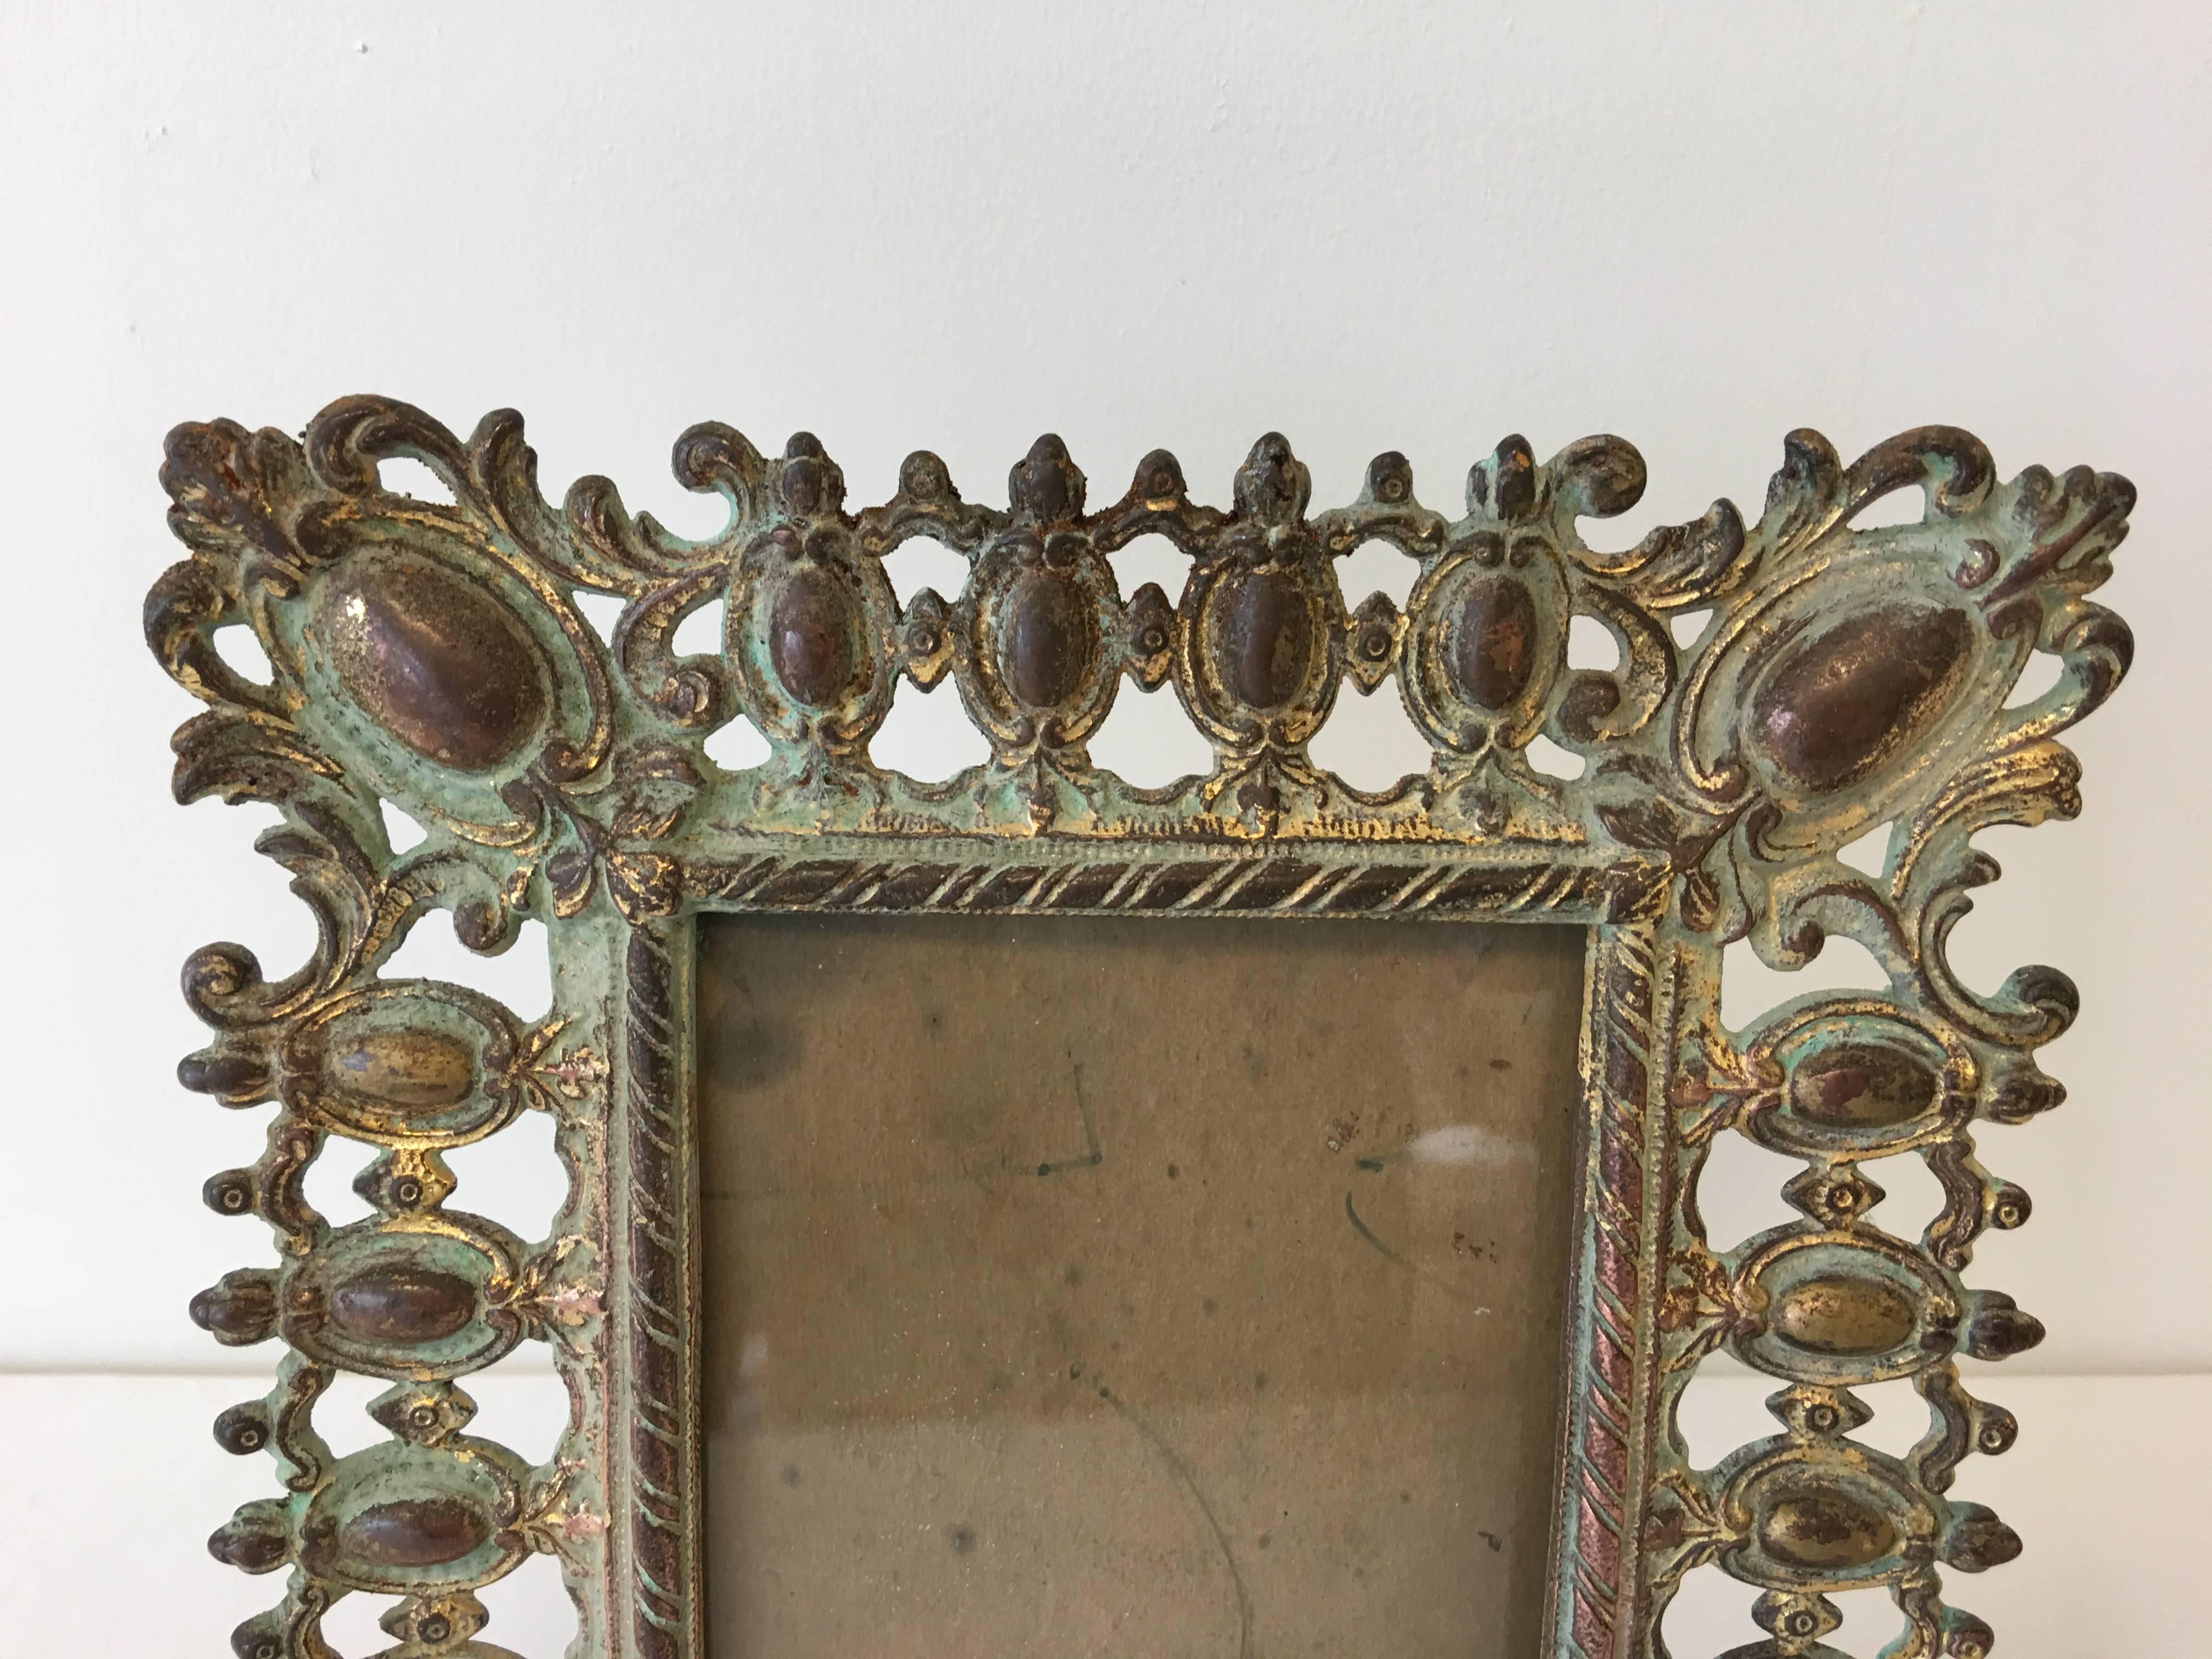 Offered is a truly stunning, 19th century, Art Nouveau standing bronze picture frame. This piece has immaculate detailing, with a flip-out stand. Fits a 4” x 6